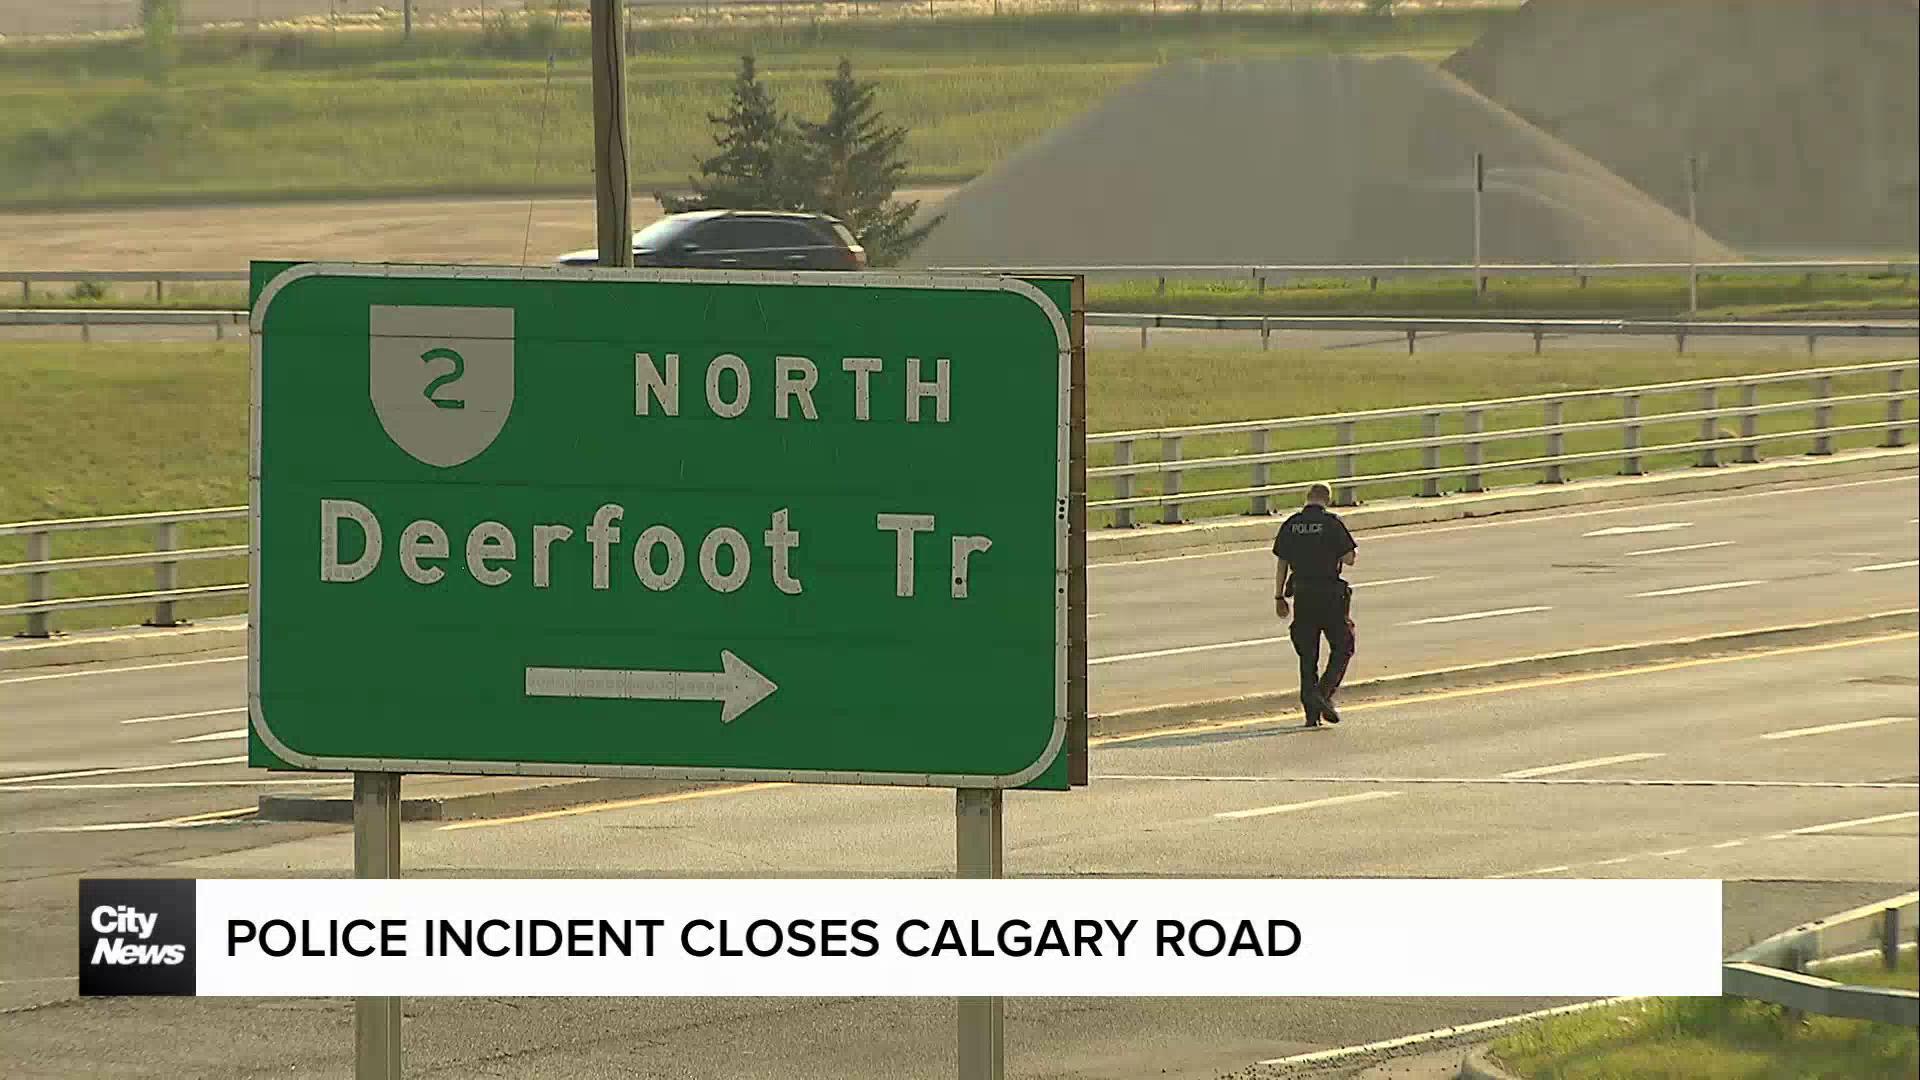 Police incident closes Calgary road